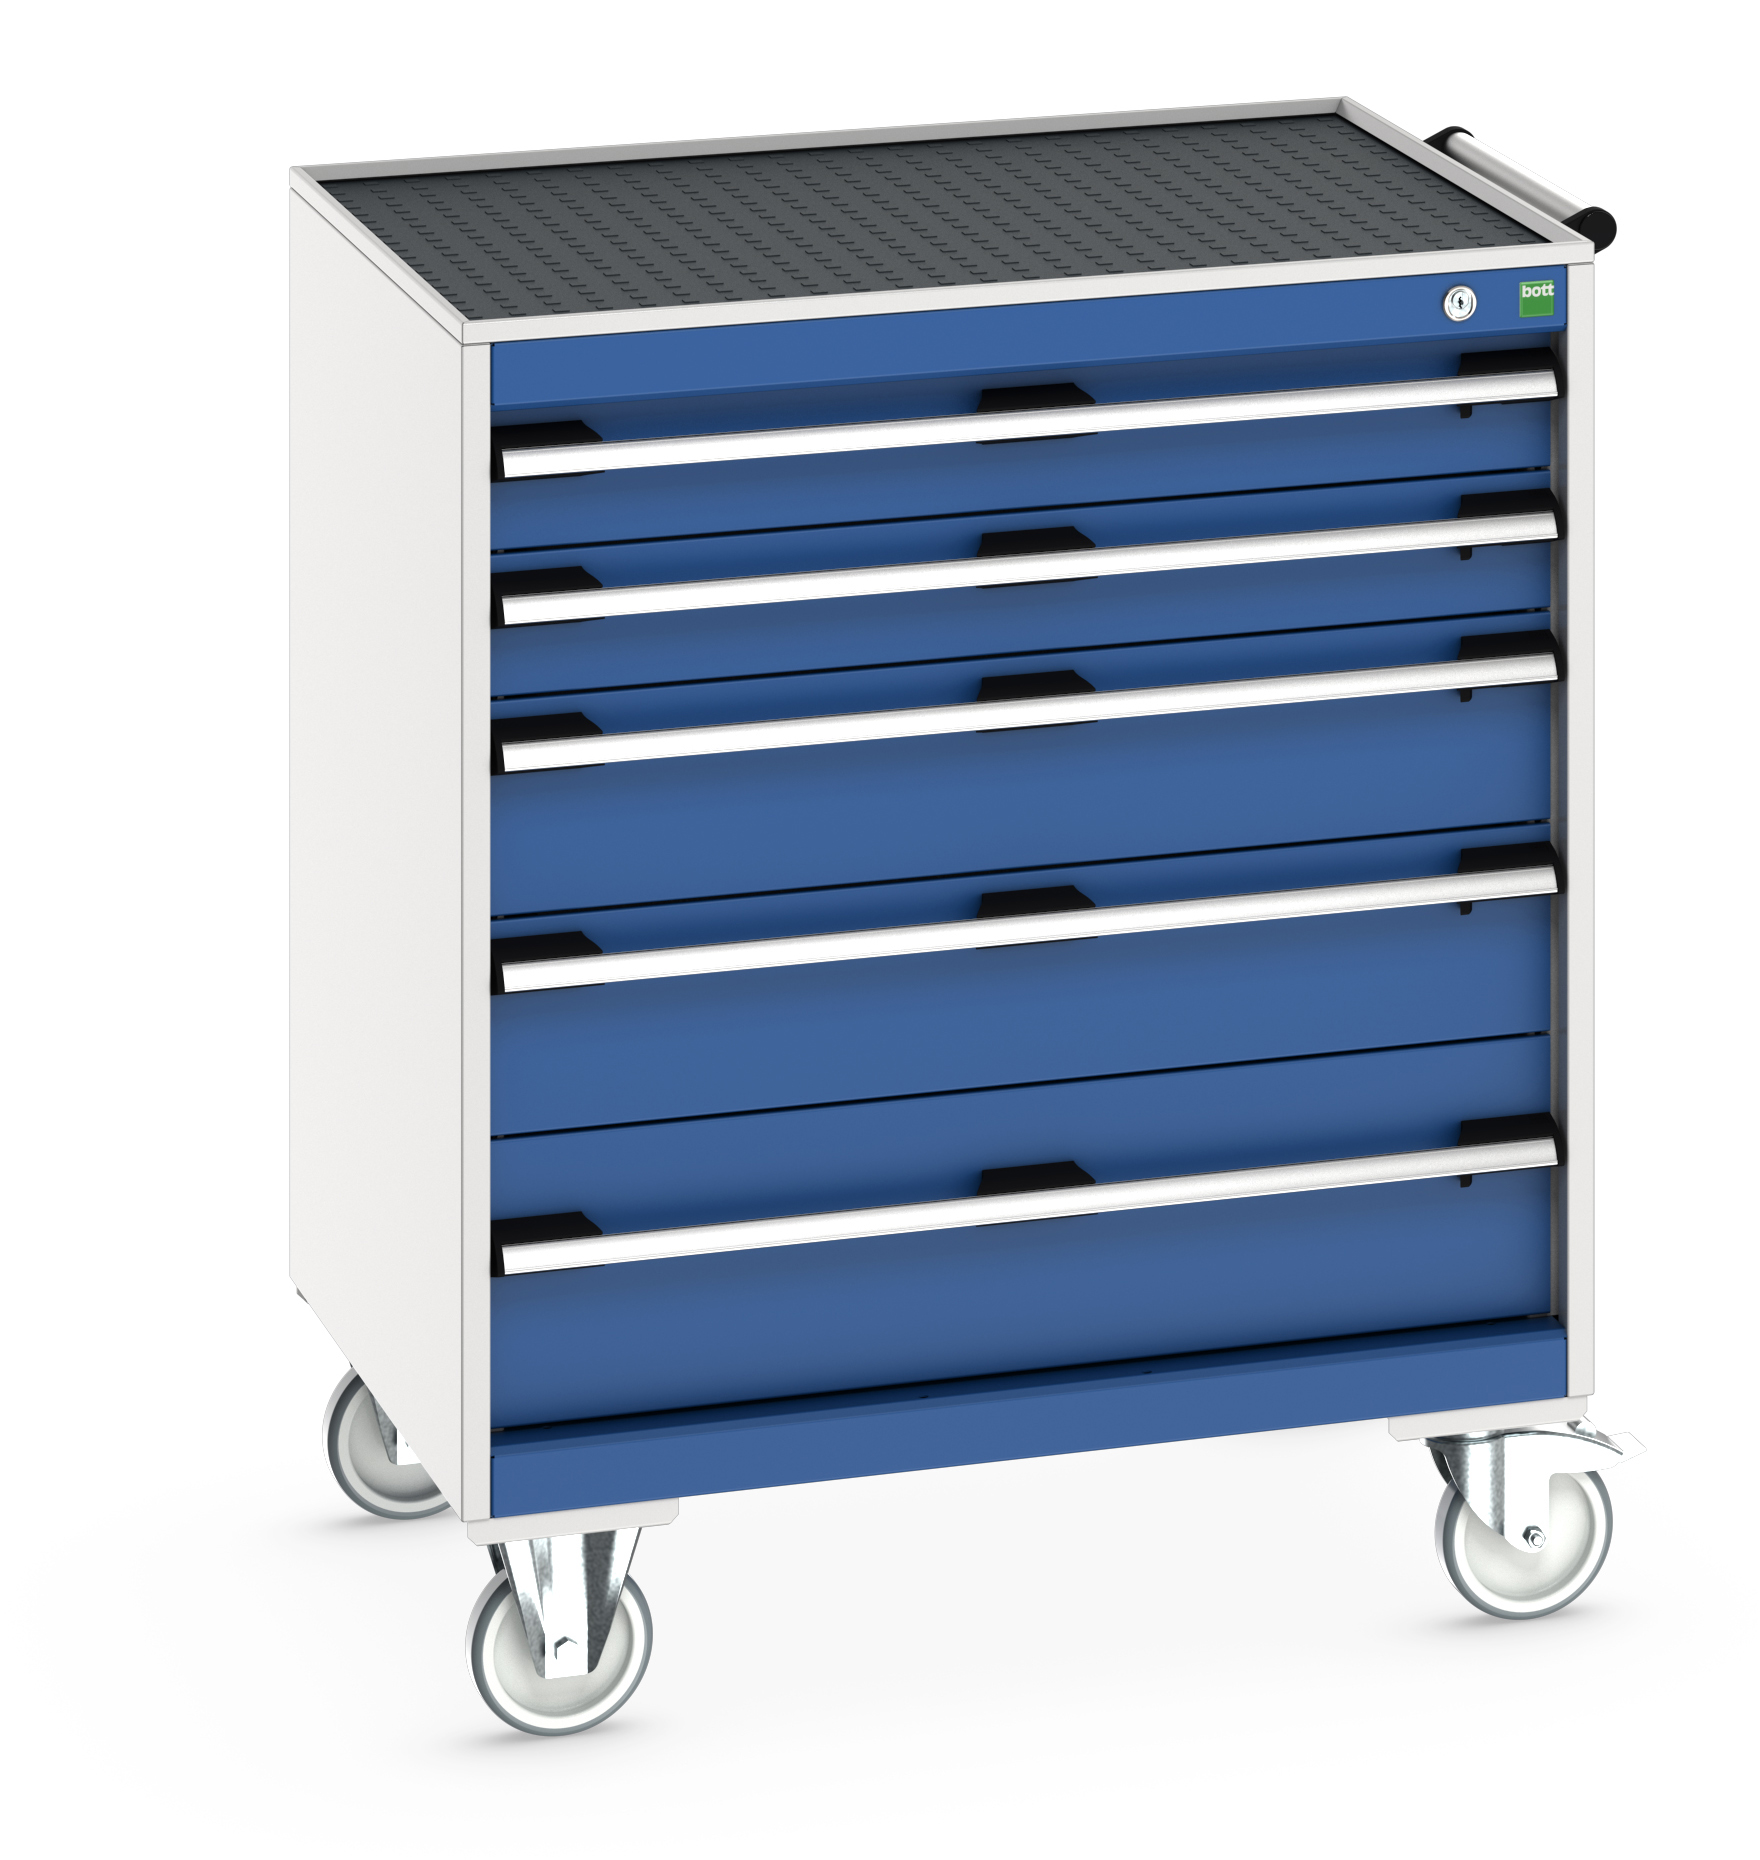 Bott Cubio Mobile Drawer Cabinet With 5 Drawers & Top Tray With Mat - 40402059.11V